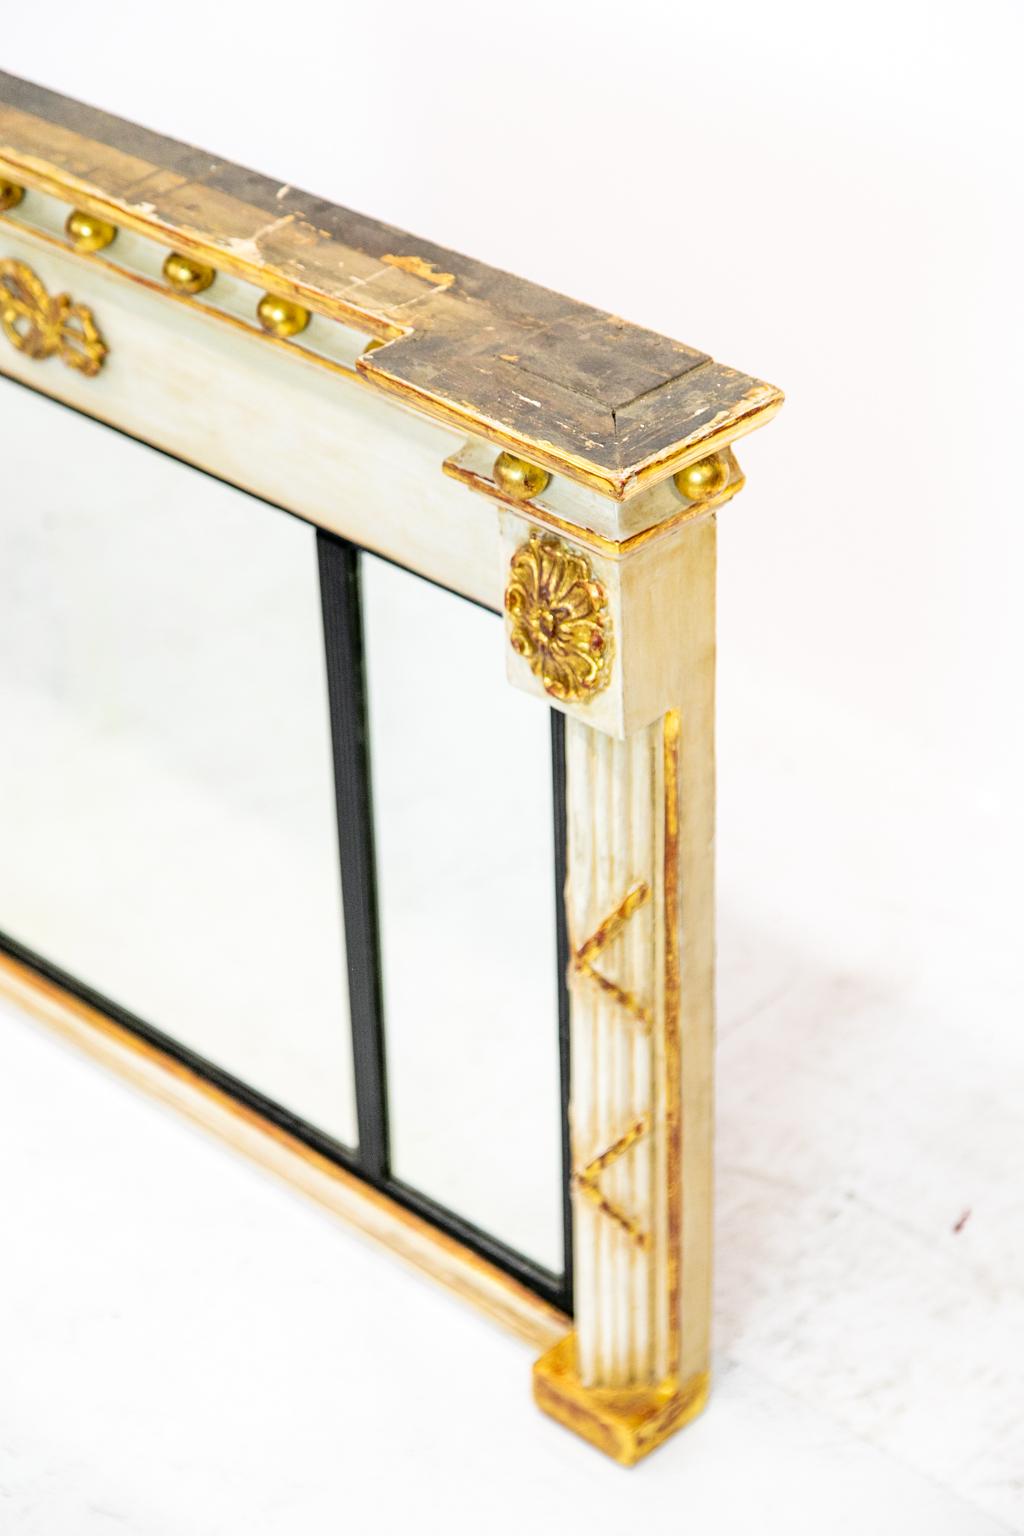 19th century painted over mantel mirror, this striking over mantel mirror has ebony liner around the mirror and is flanked by reeded columns. Gilt balls and medallions grace the top. It has three panels of beveled mirrors.